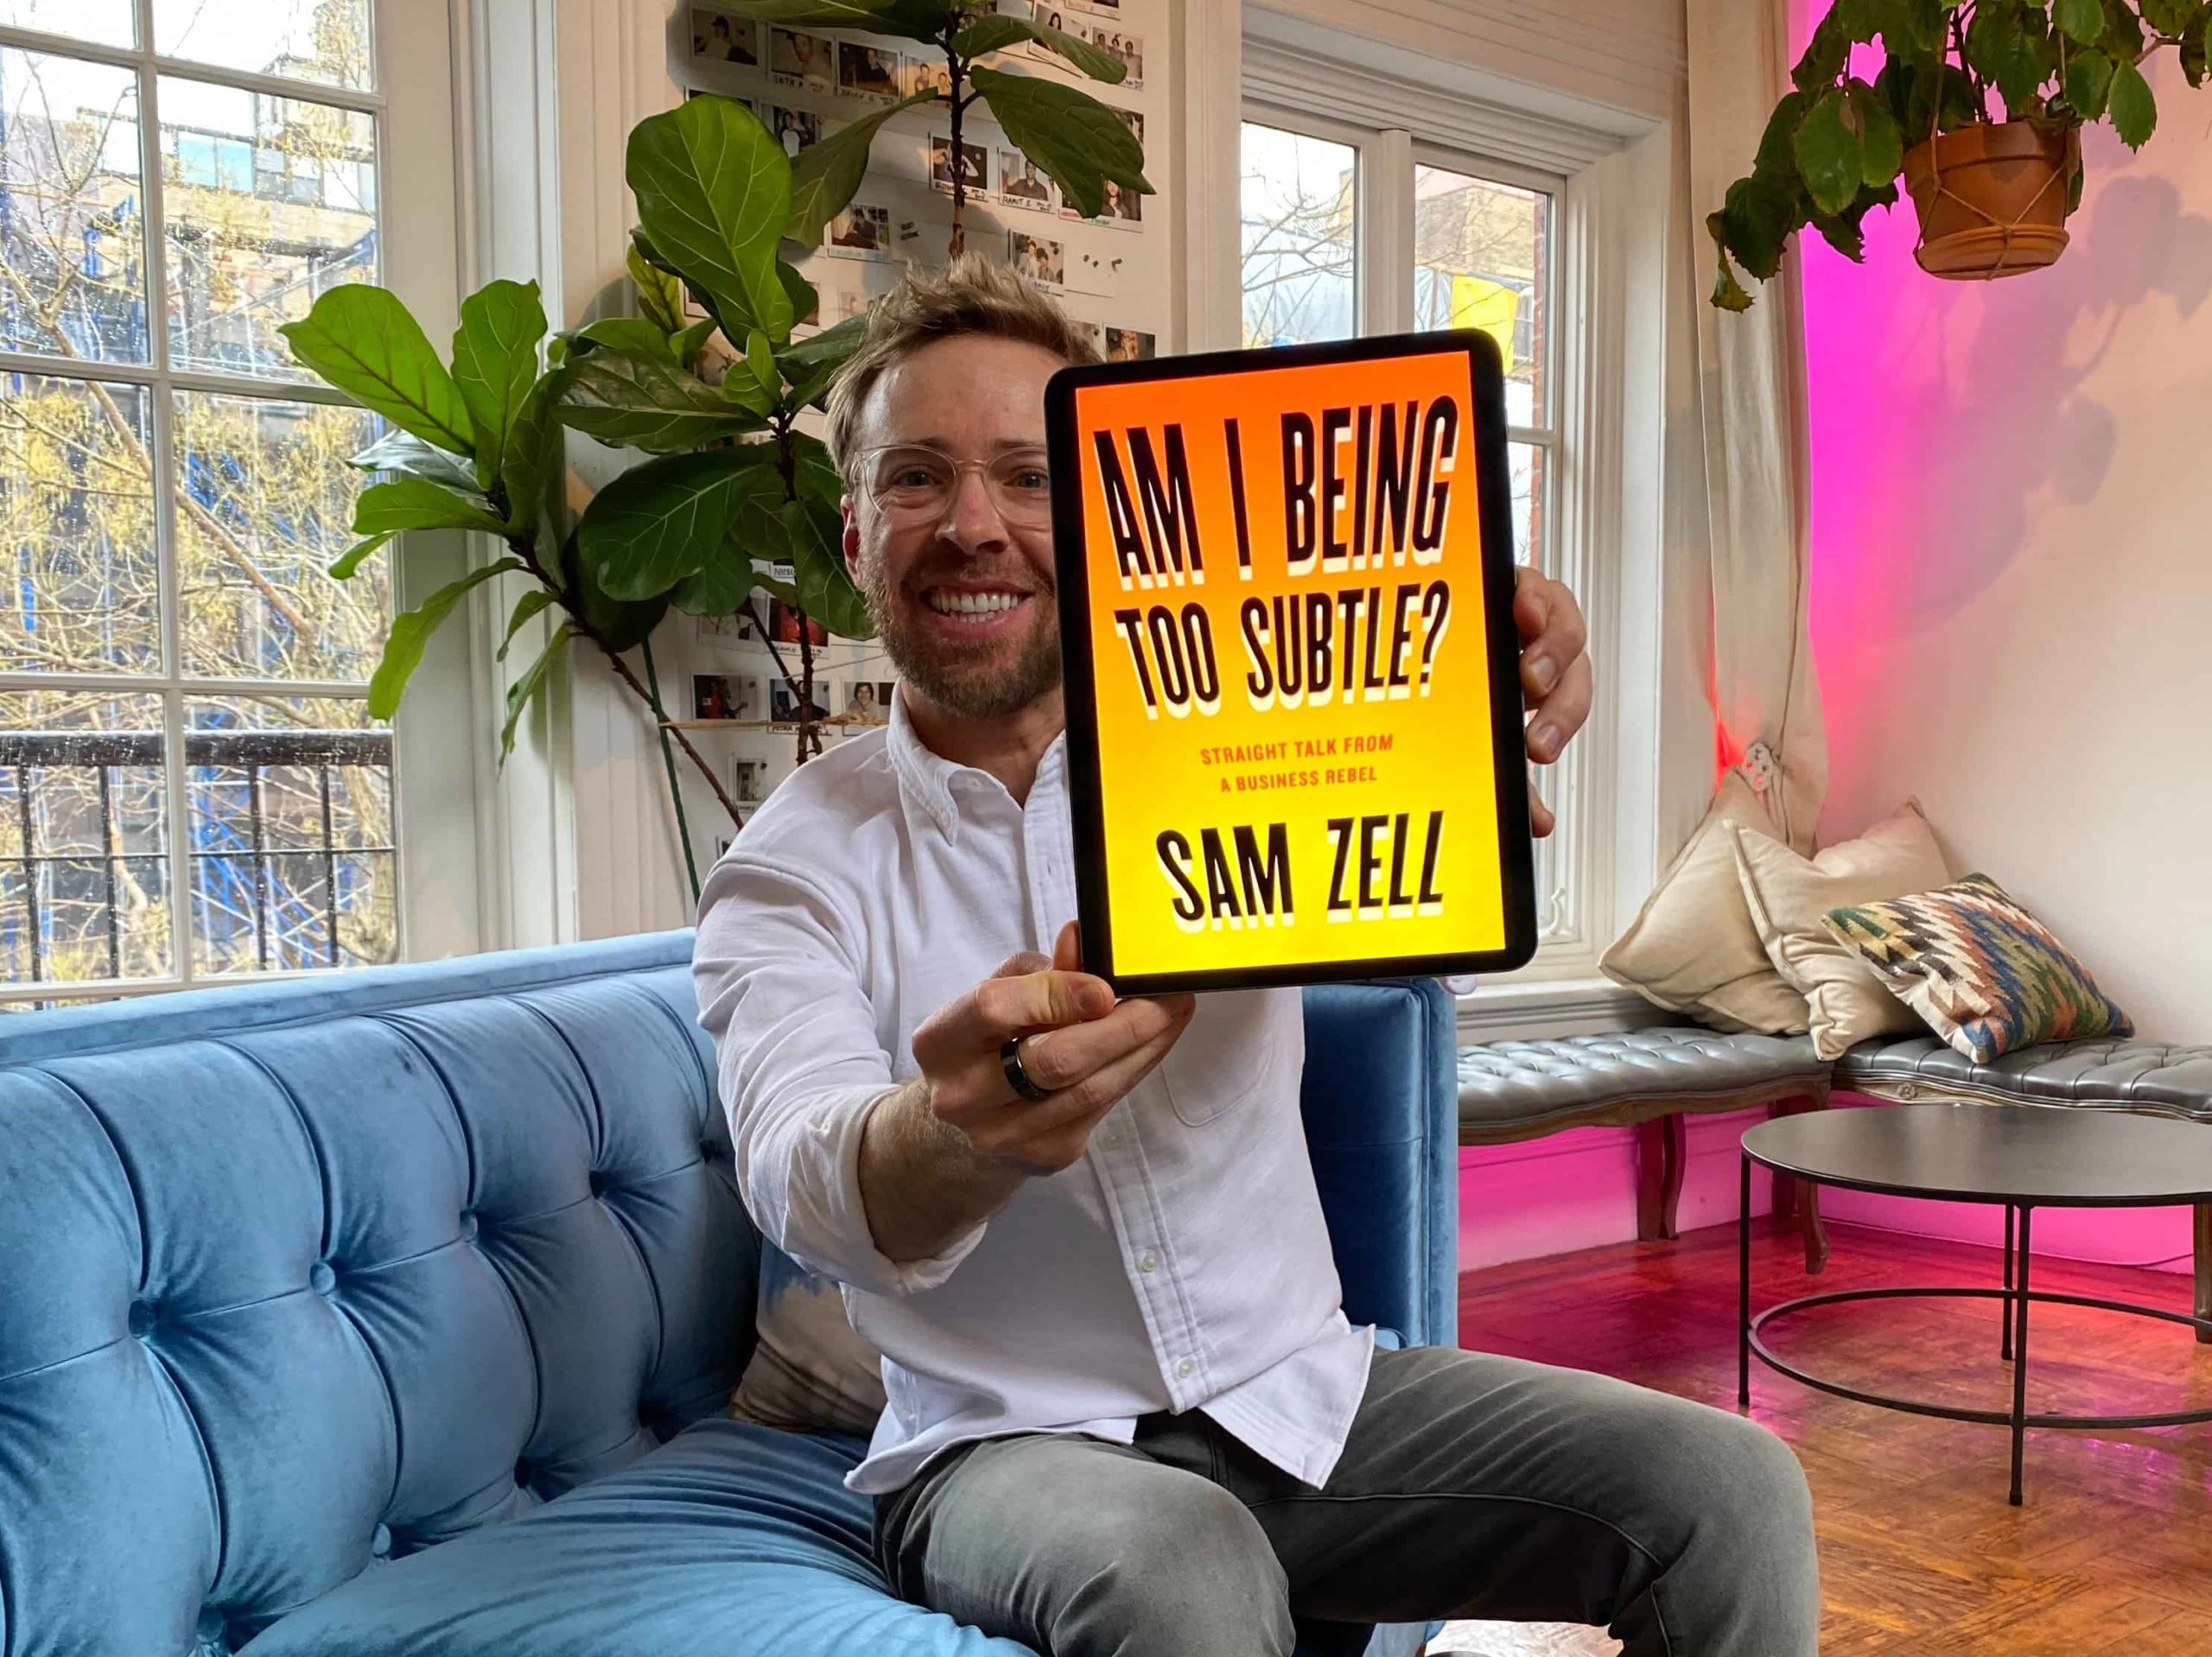 Nick Gray reading "Am I Being Too Subtle?" by Sam Zell ebook